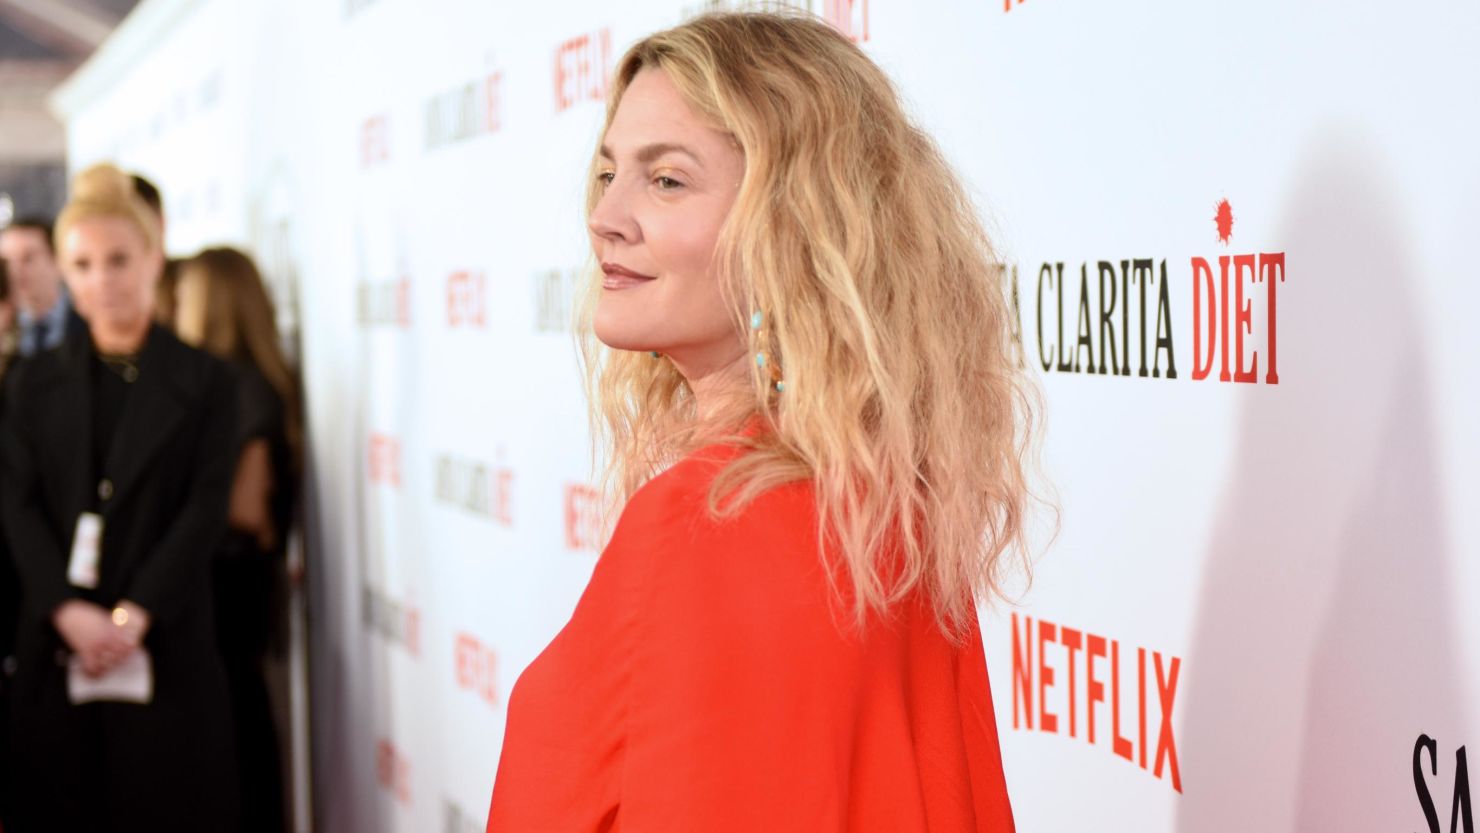 Drew Barrymore attends the "Santa Clarita Diet" season 2 premiere on March 22, 2018, in Hollywood.